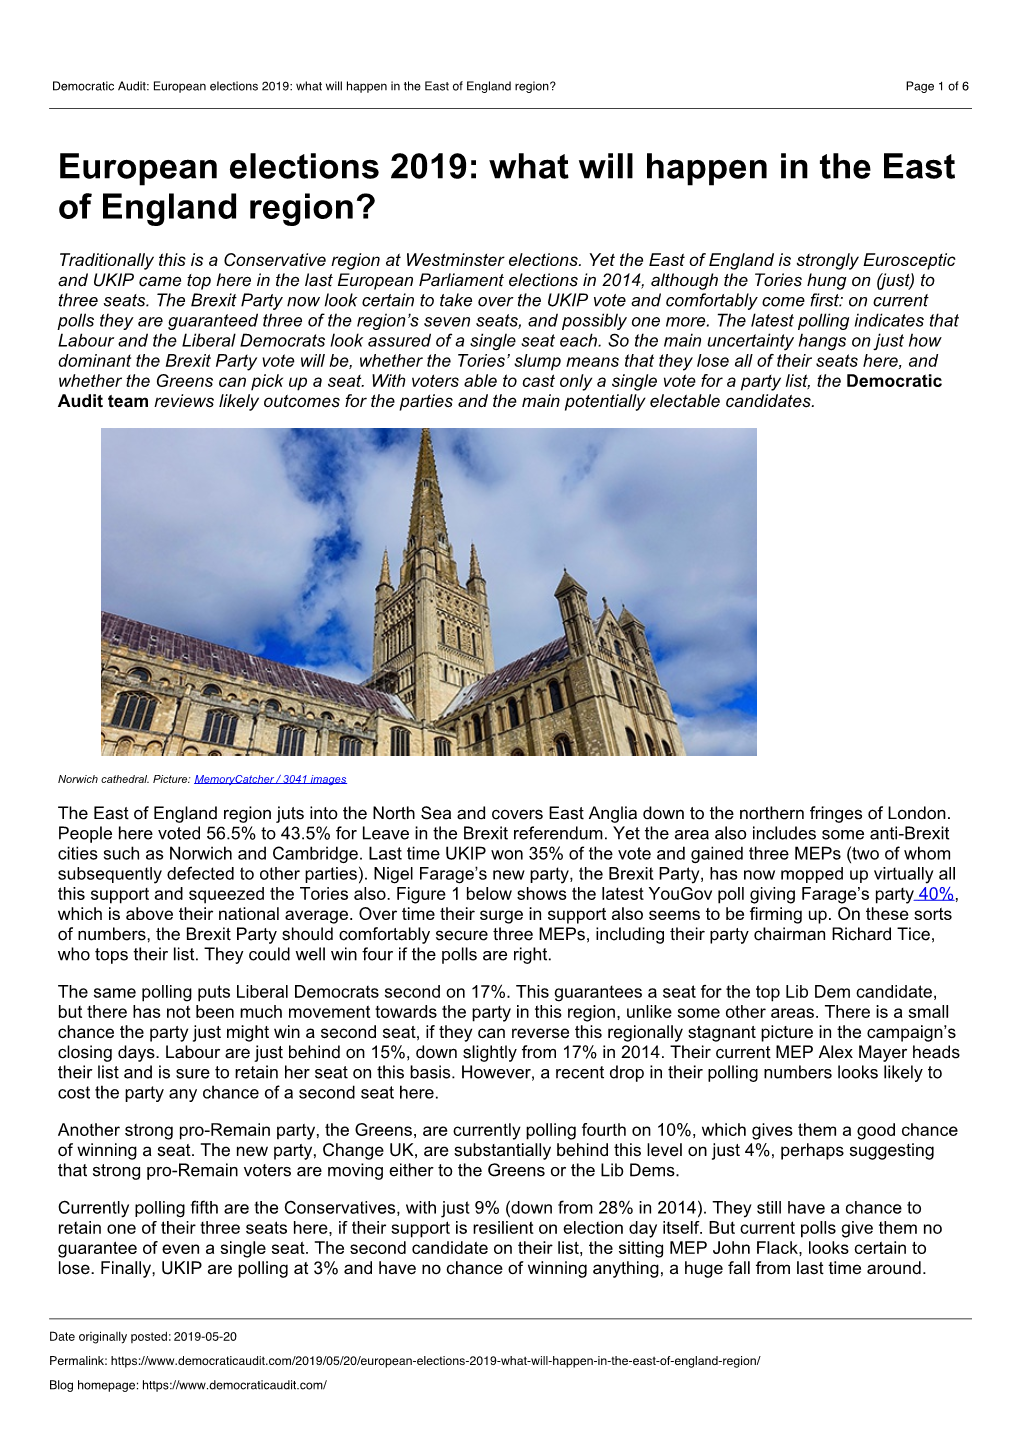 Democratic Audit: European Elections 2019: What Will Happen in the East of England Region? Page 1 of 6